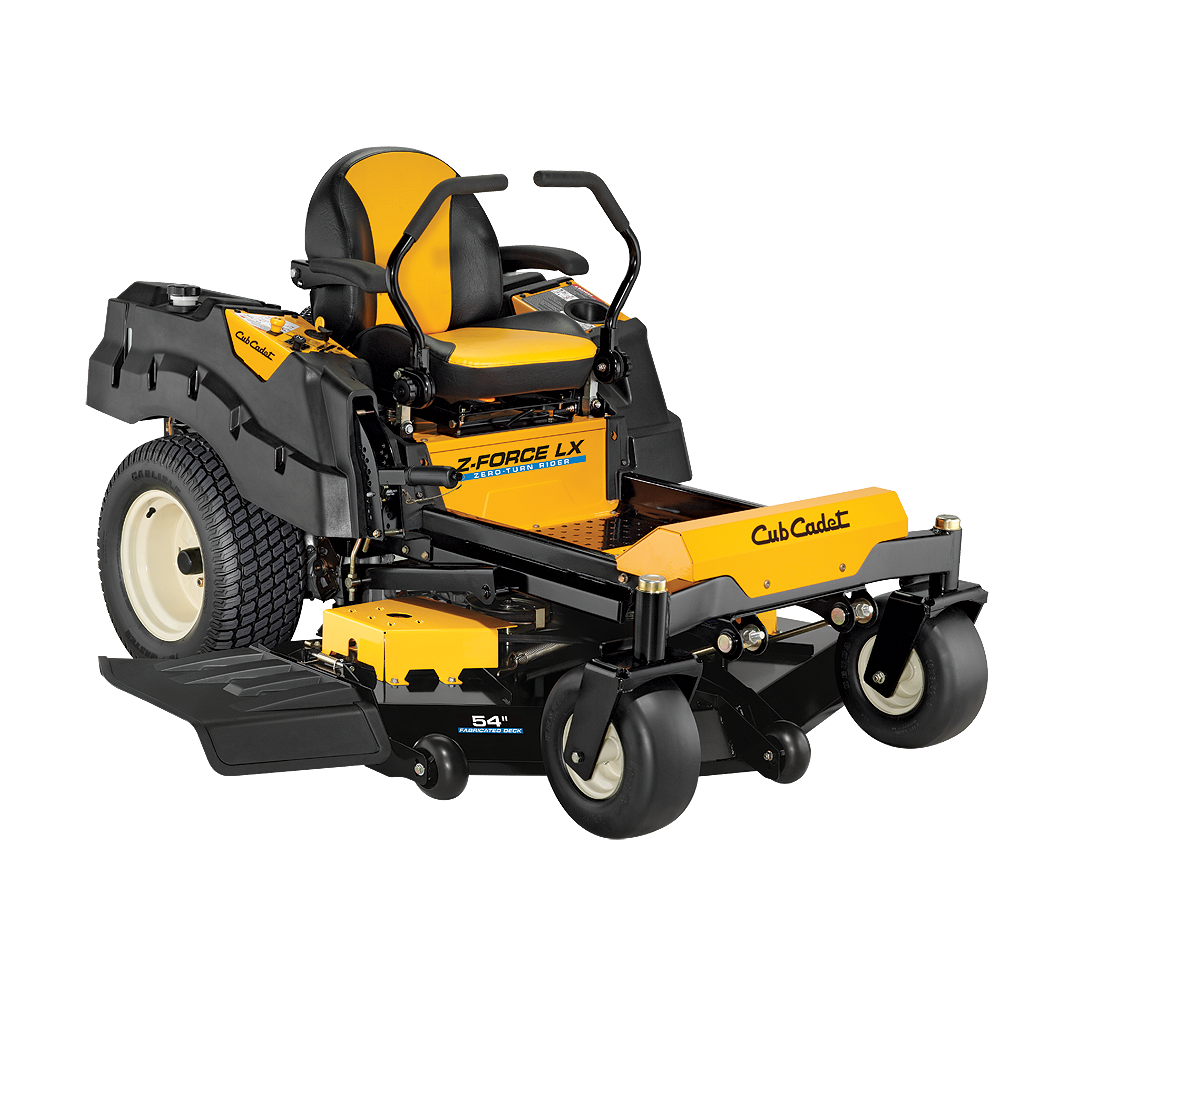 Cub Cadet Z-FORCE L/LX Series Zero Turn Mower in the Baltimore and ...